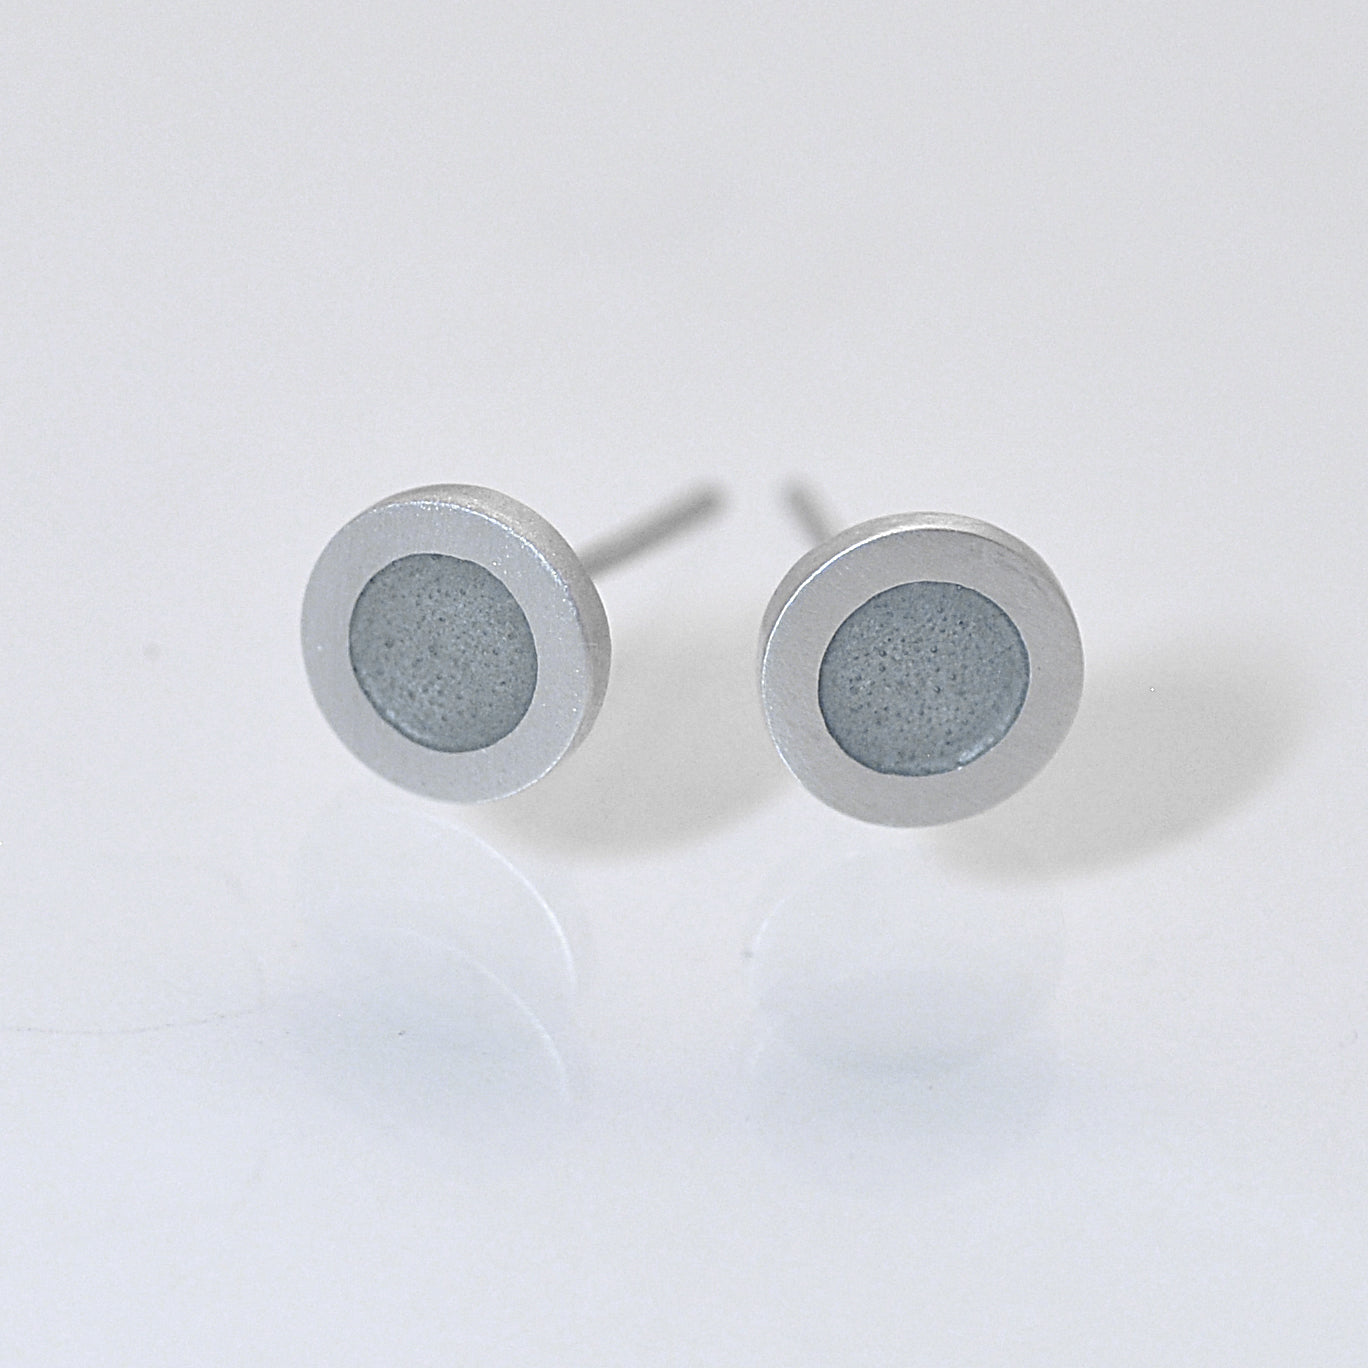 Small flat round ear studs with Mouse grey coloured enamel in the centre